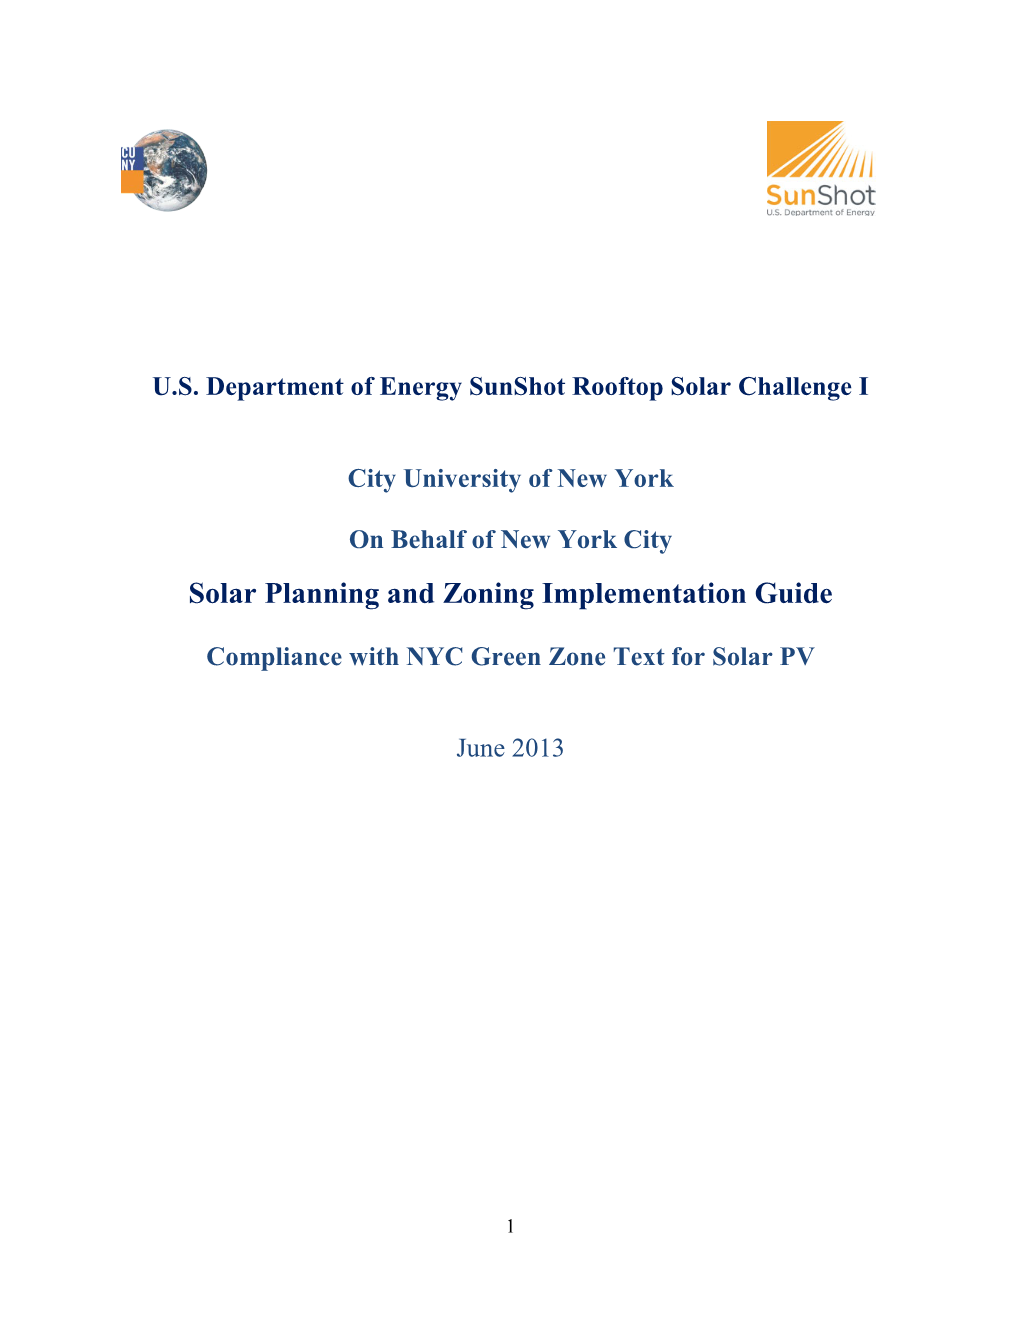 NYC Solar Planning and Zoning Implementation Guide